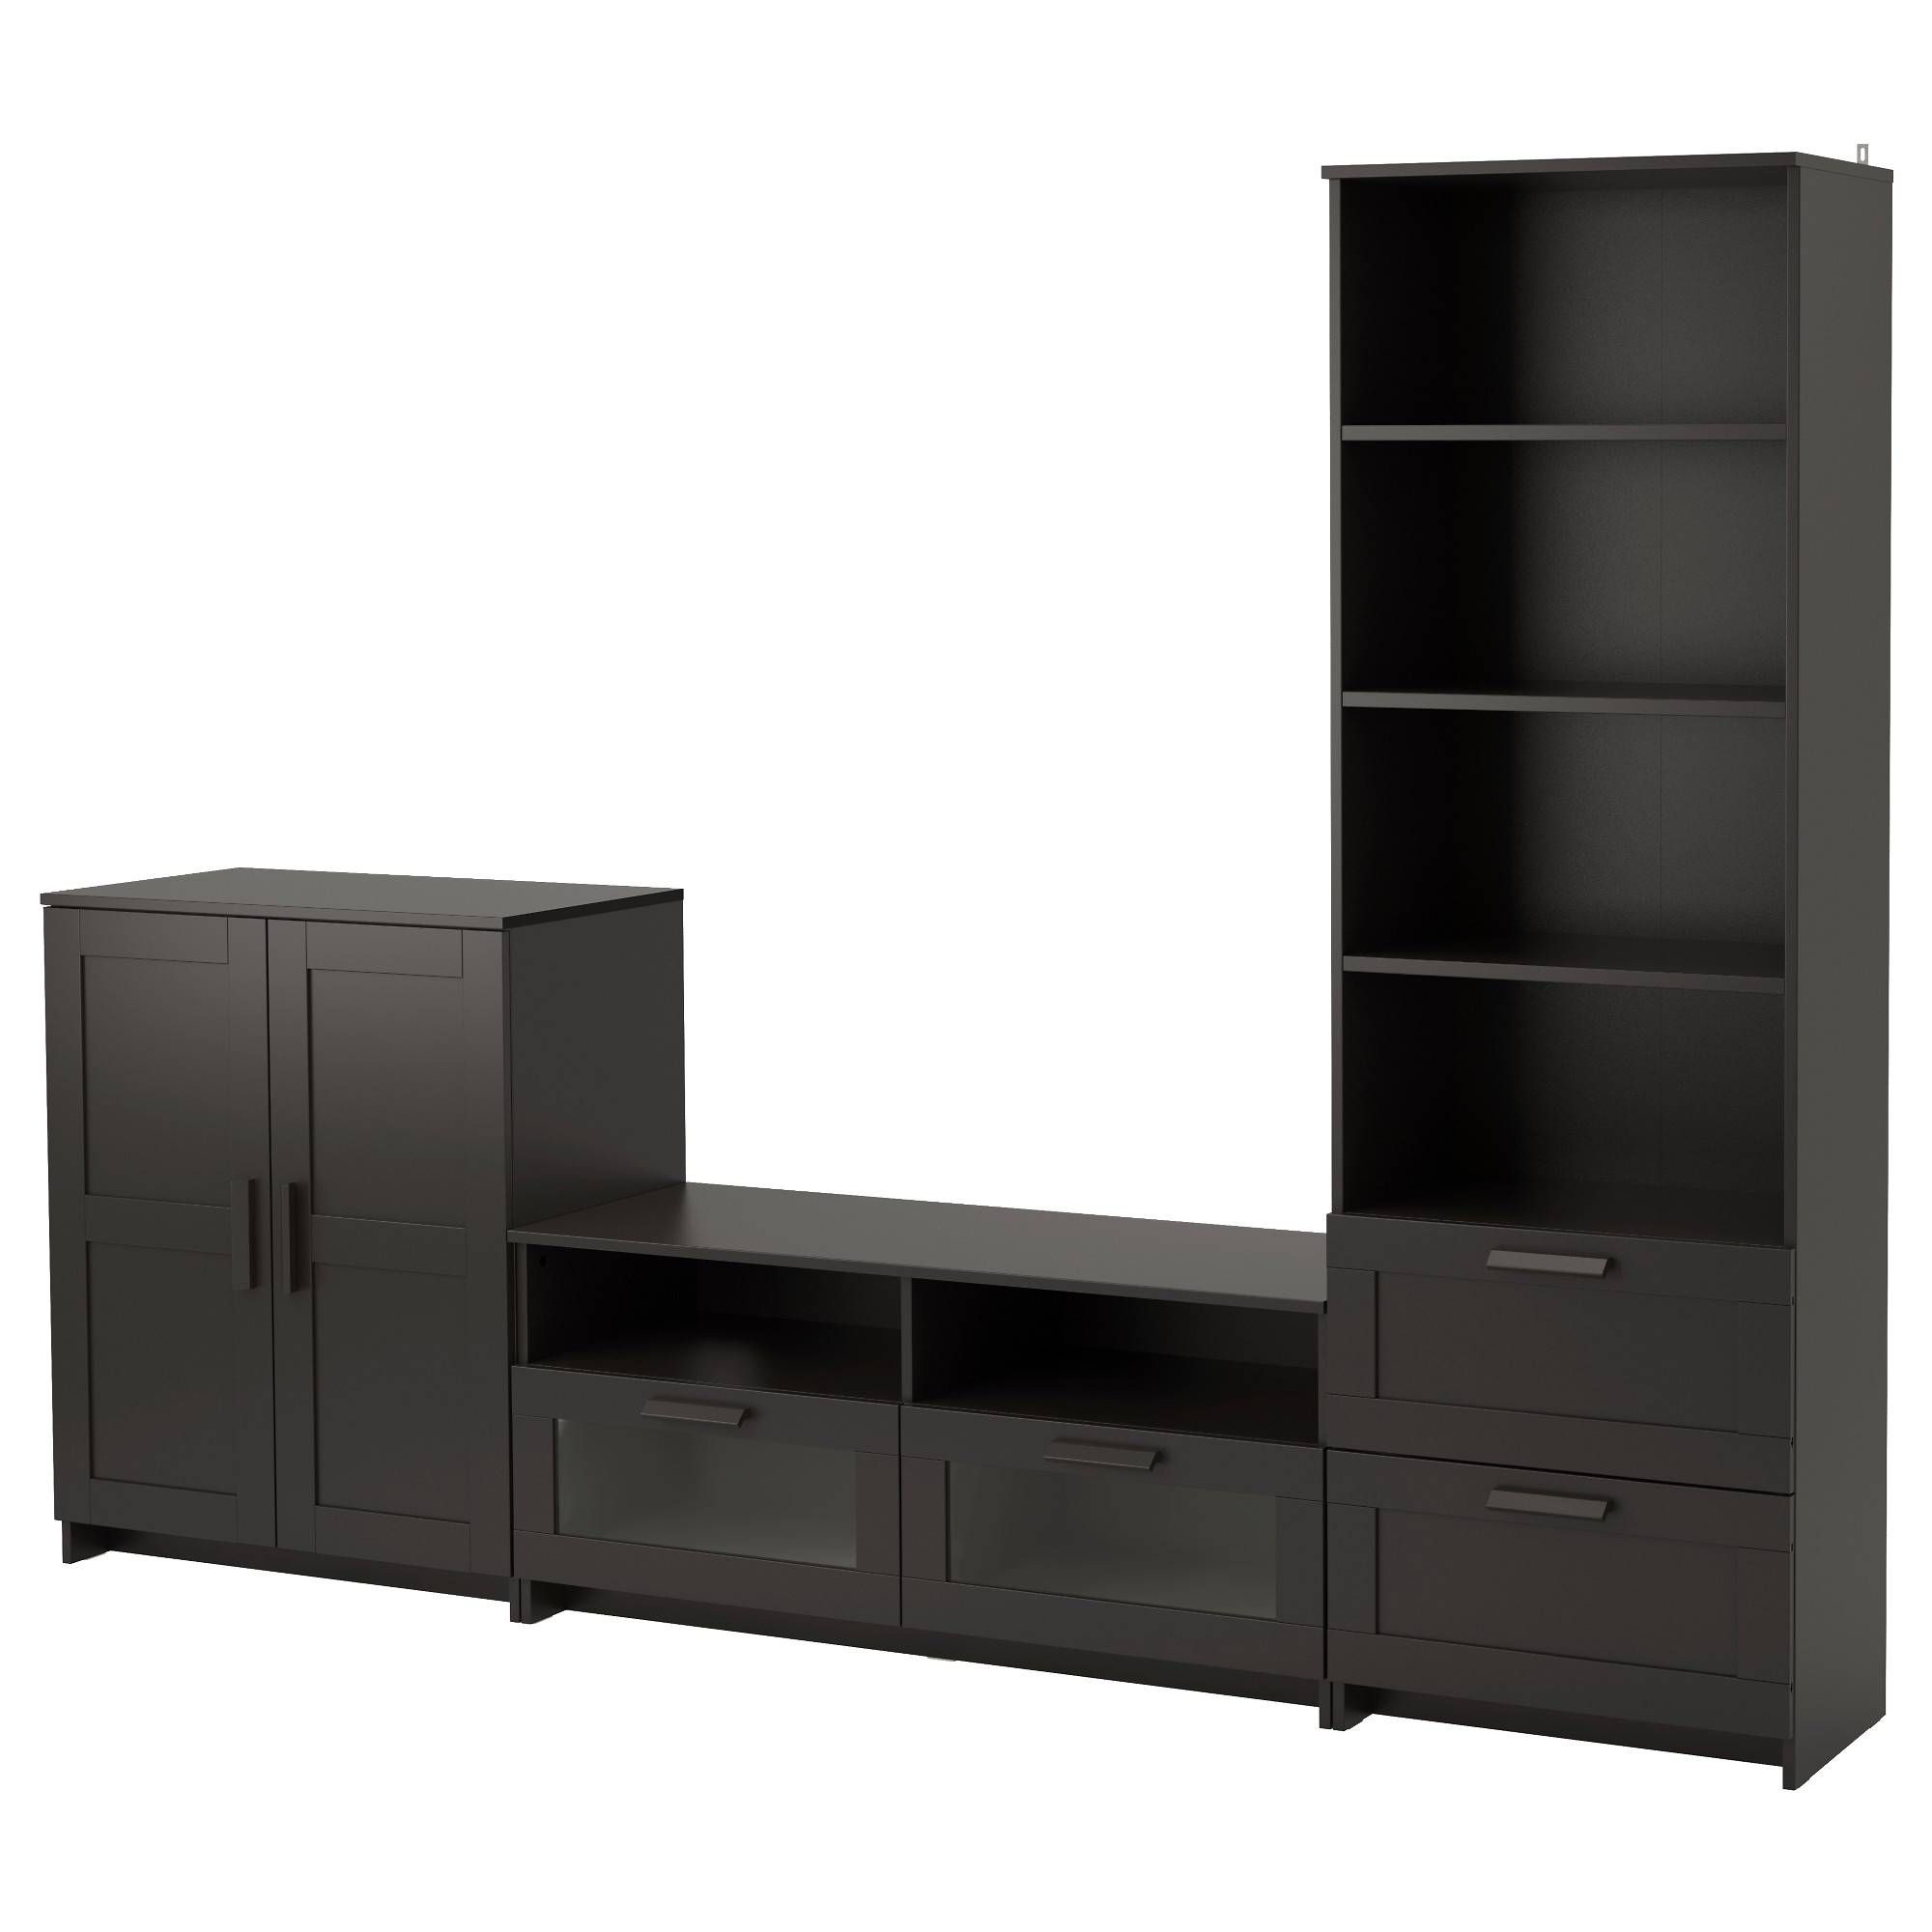 Brimnes Tv Storage Combination Black 260x41x190 Cm – Ikea In Black Tv Cabinets With Drawers (Photo 5 of 15)